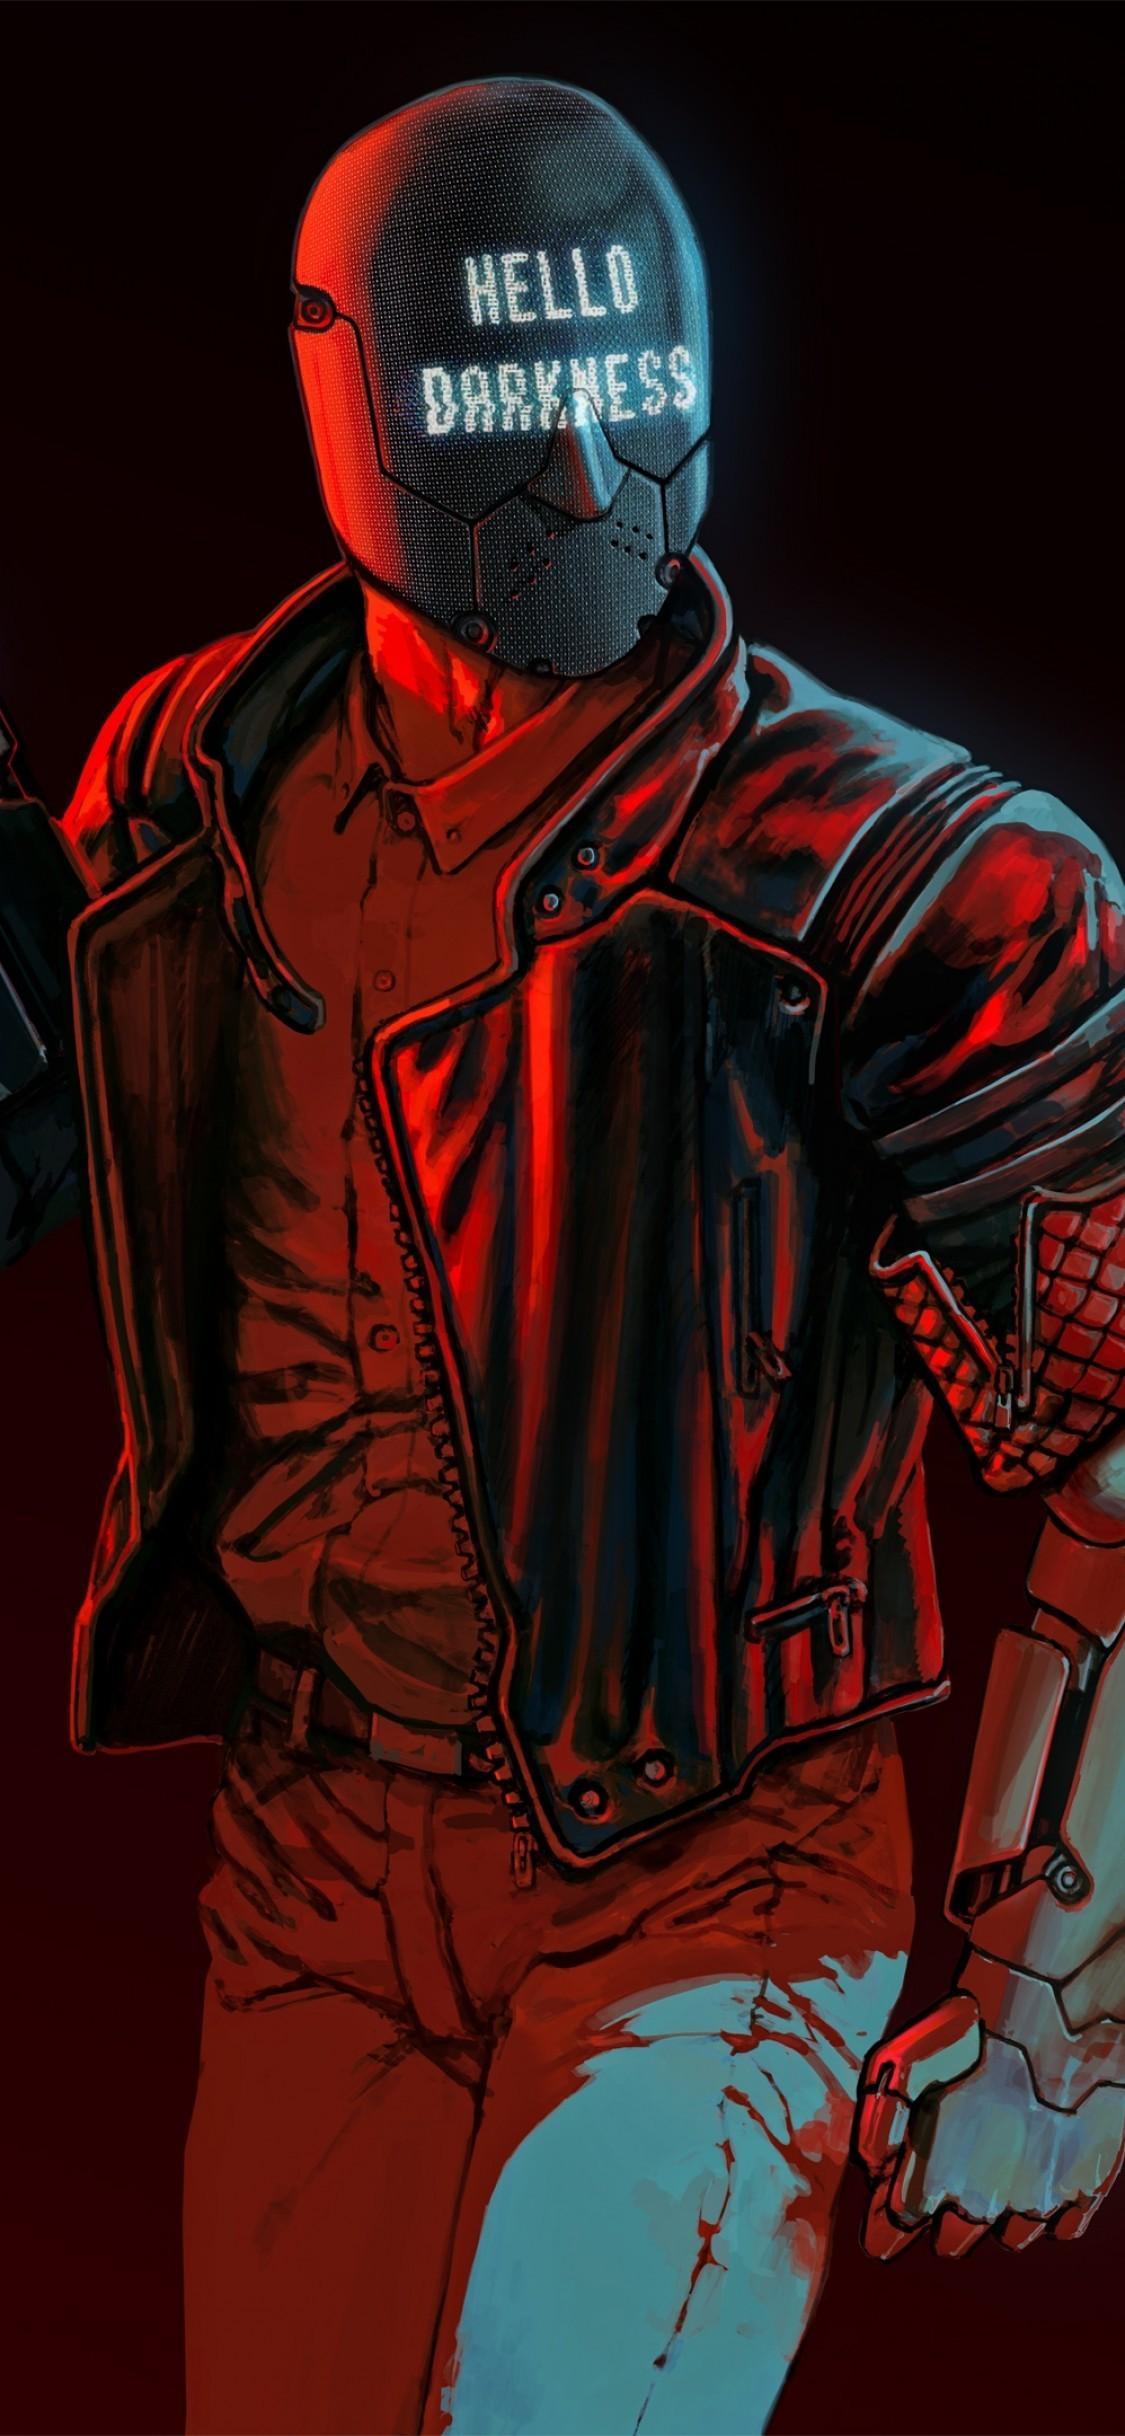 Download 1125x2436 Ruiner, Cyborg Wallpaper for iPhone X